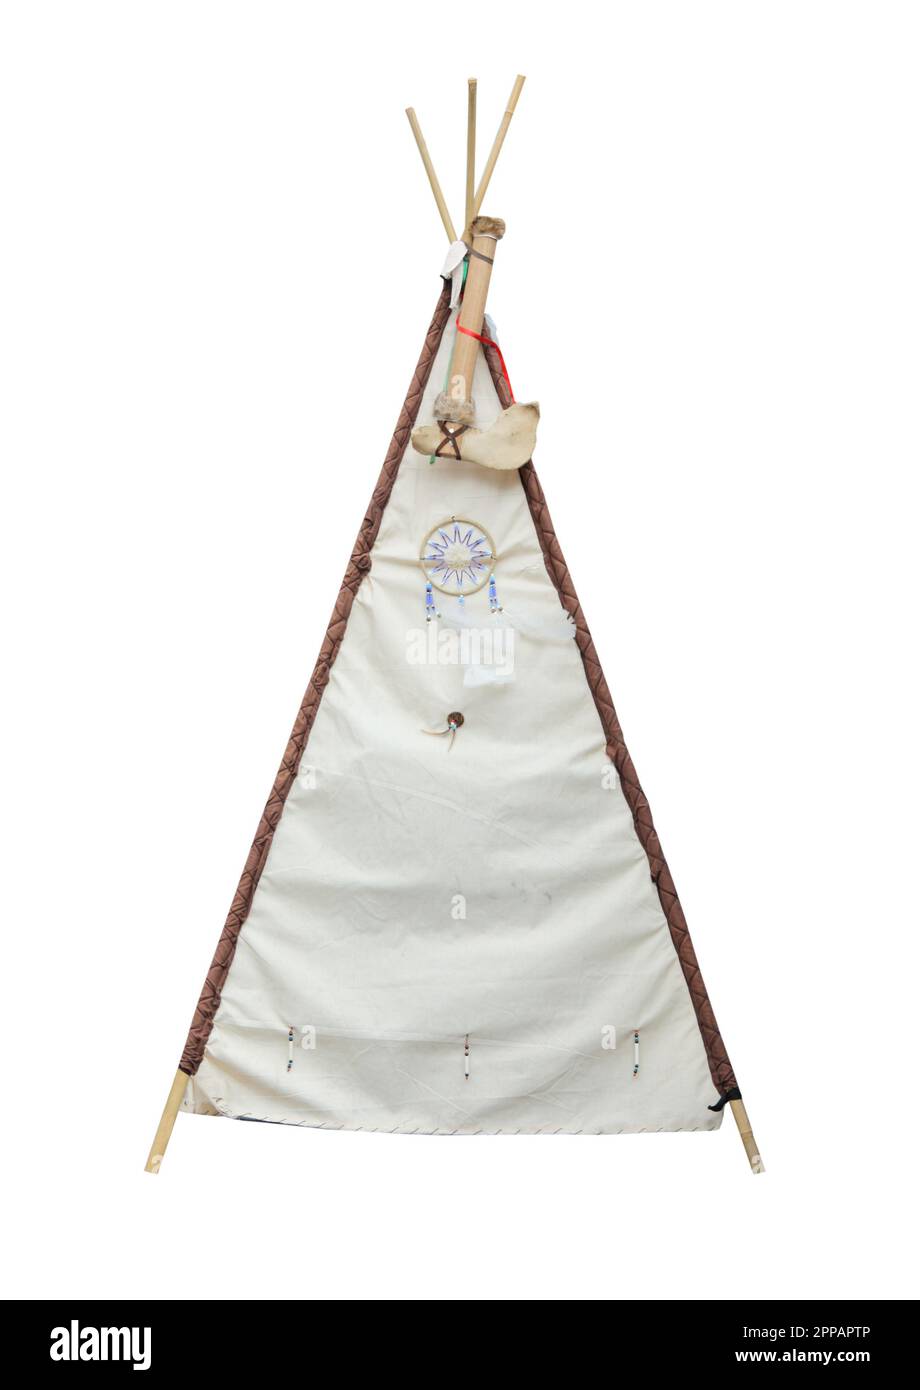 A Traditional South American Style Teepee Tent. Stock Photo